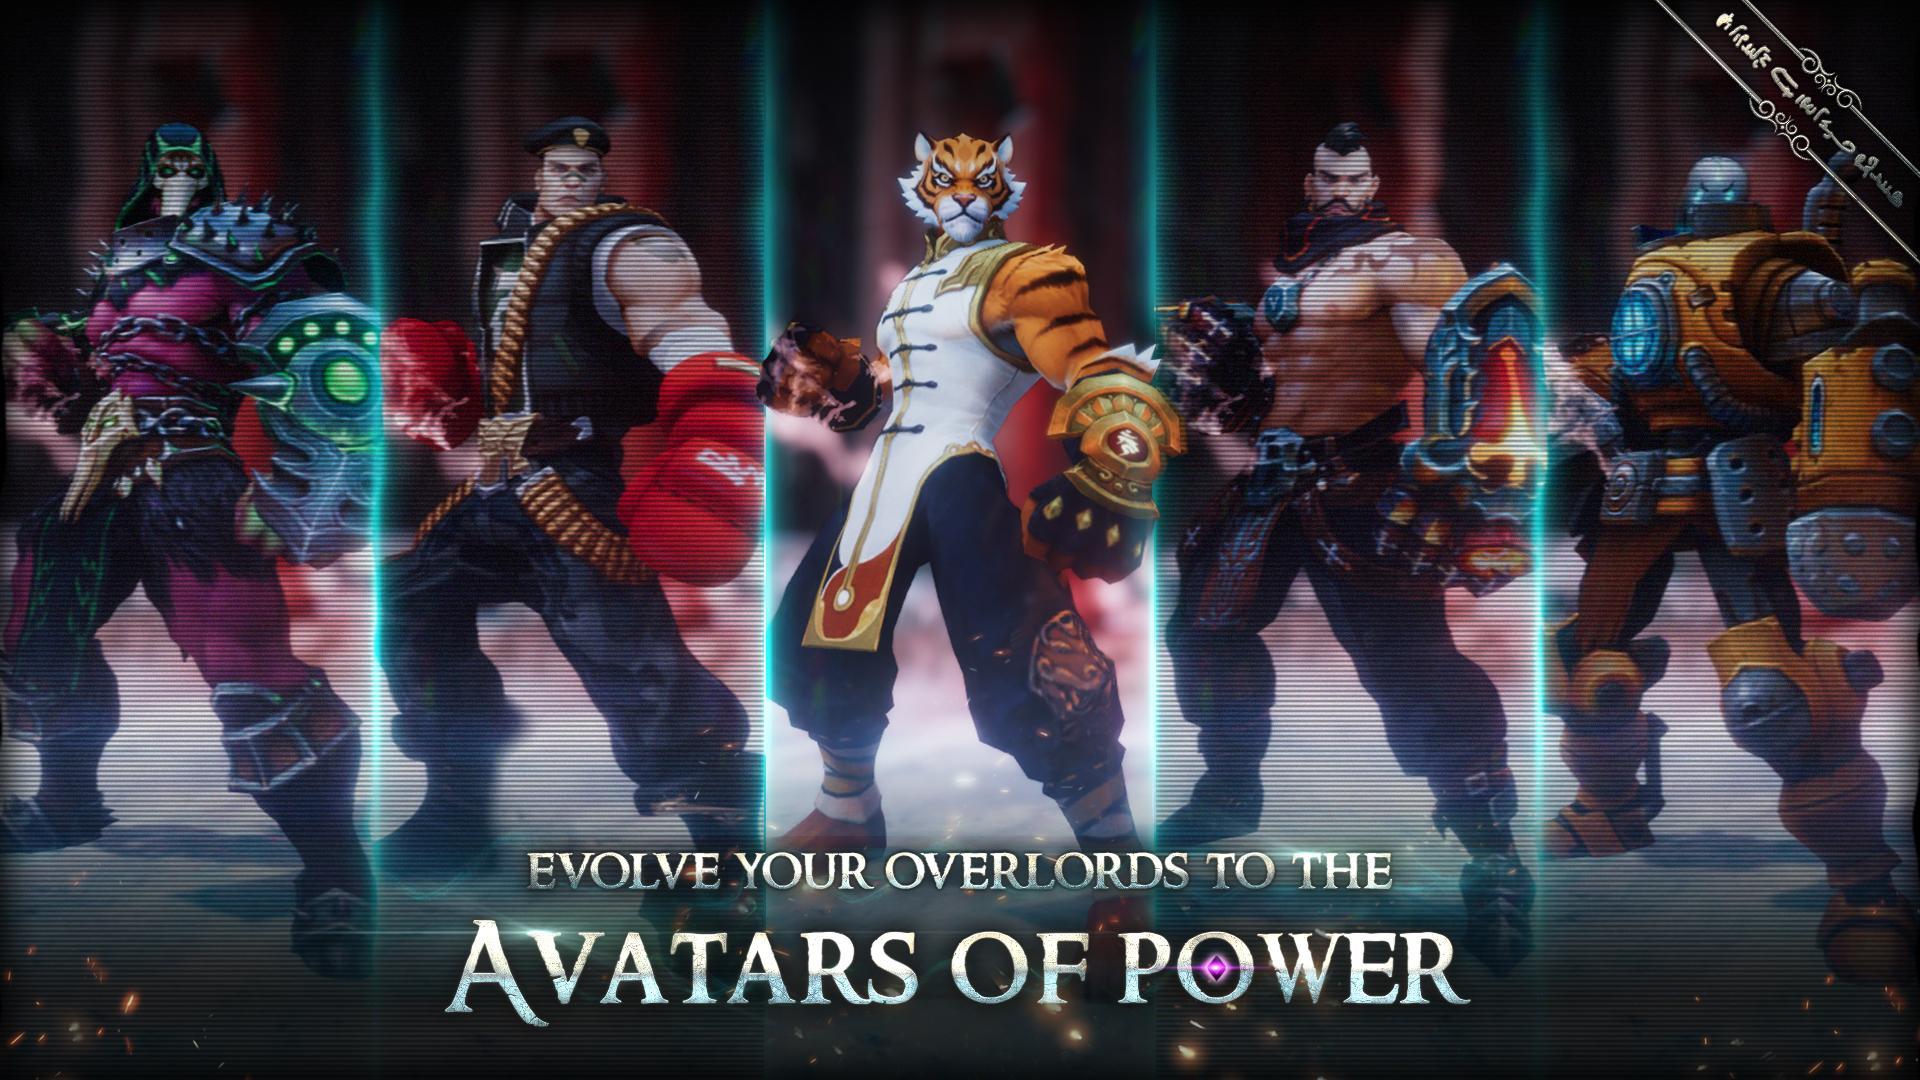 Overlords of Oblivion for Android - APK Download - 